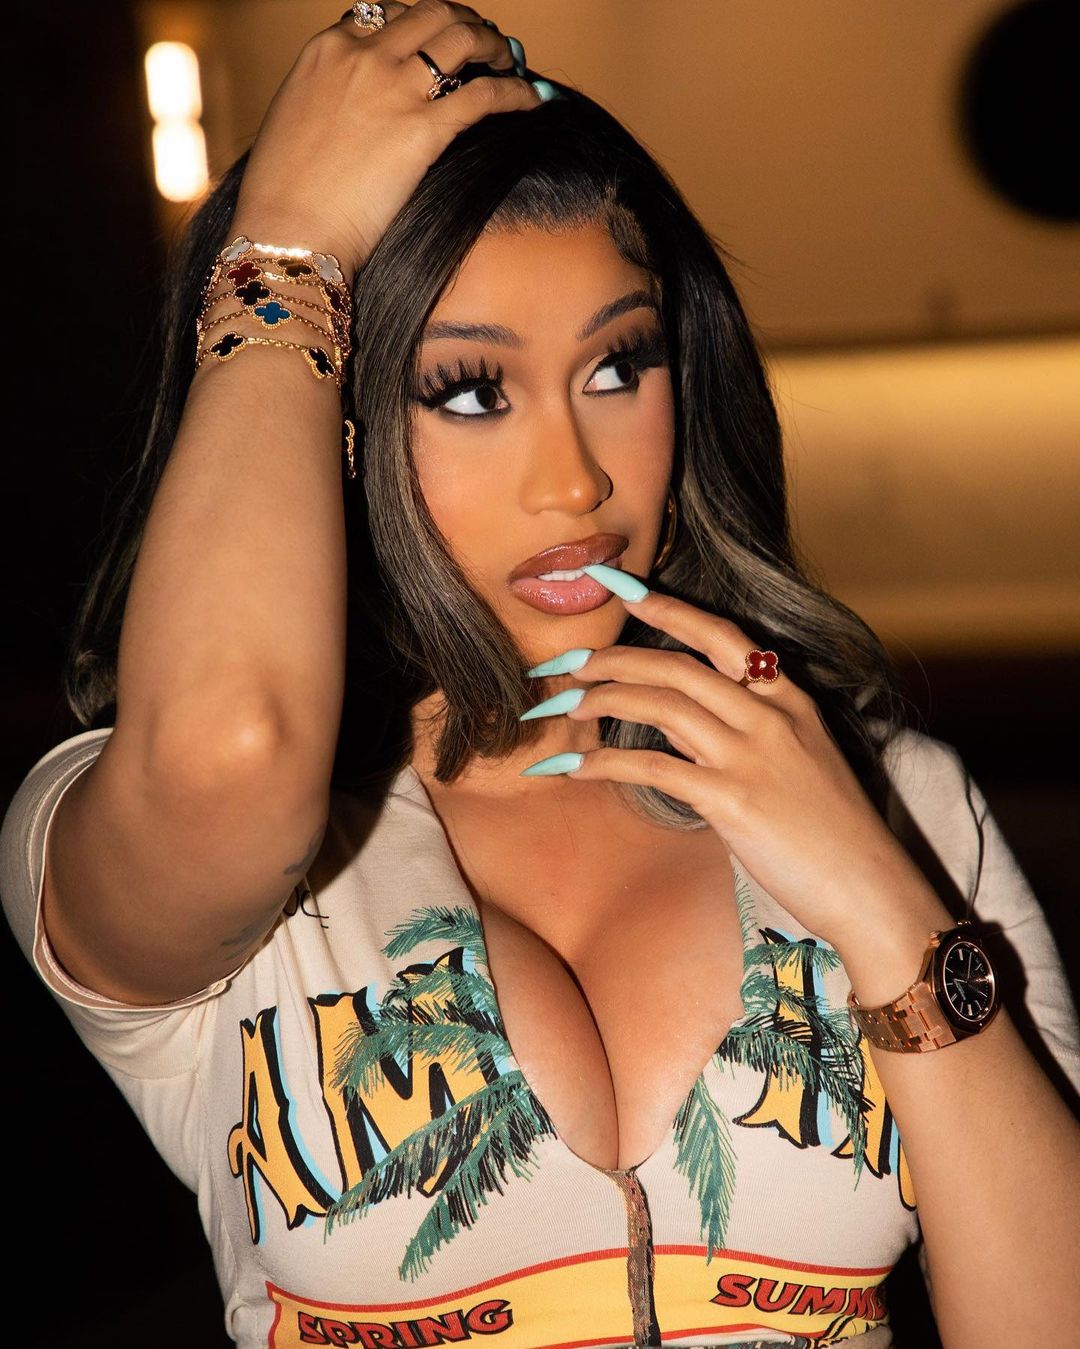 National Nail Polish Day: Here Are Cardi B’s Most Memorable Nail Looks To Inspire Your Next Set